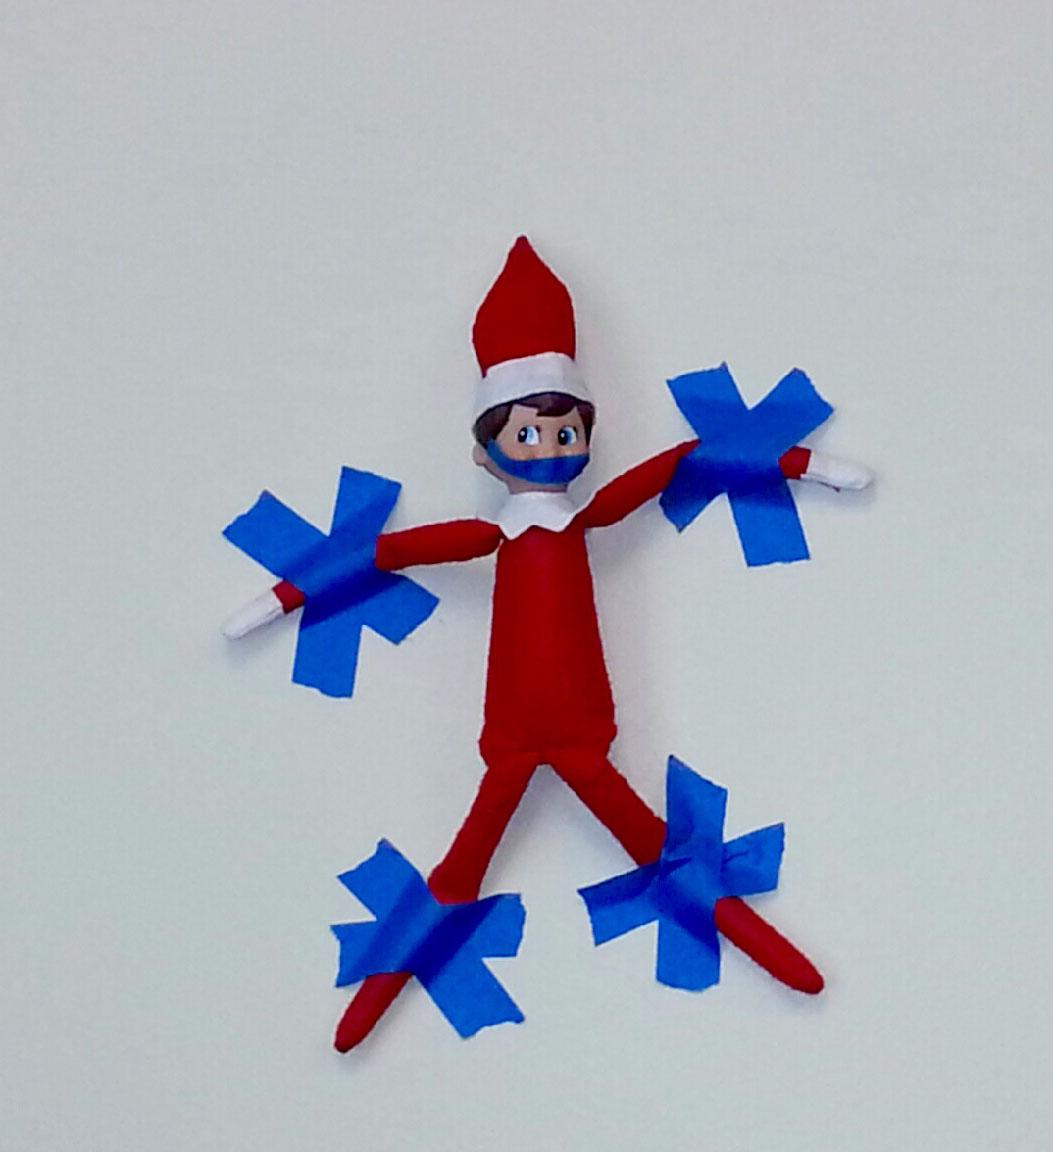 Elf+on+a+Shelf+popping+up+in+teachers+classrooms